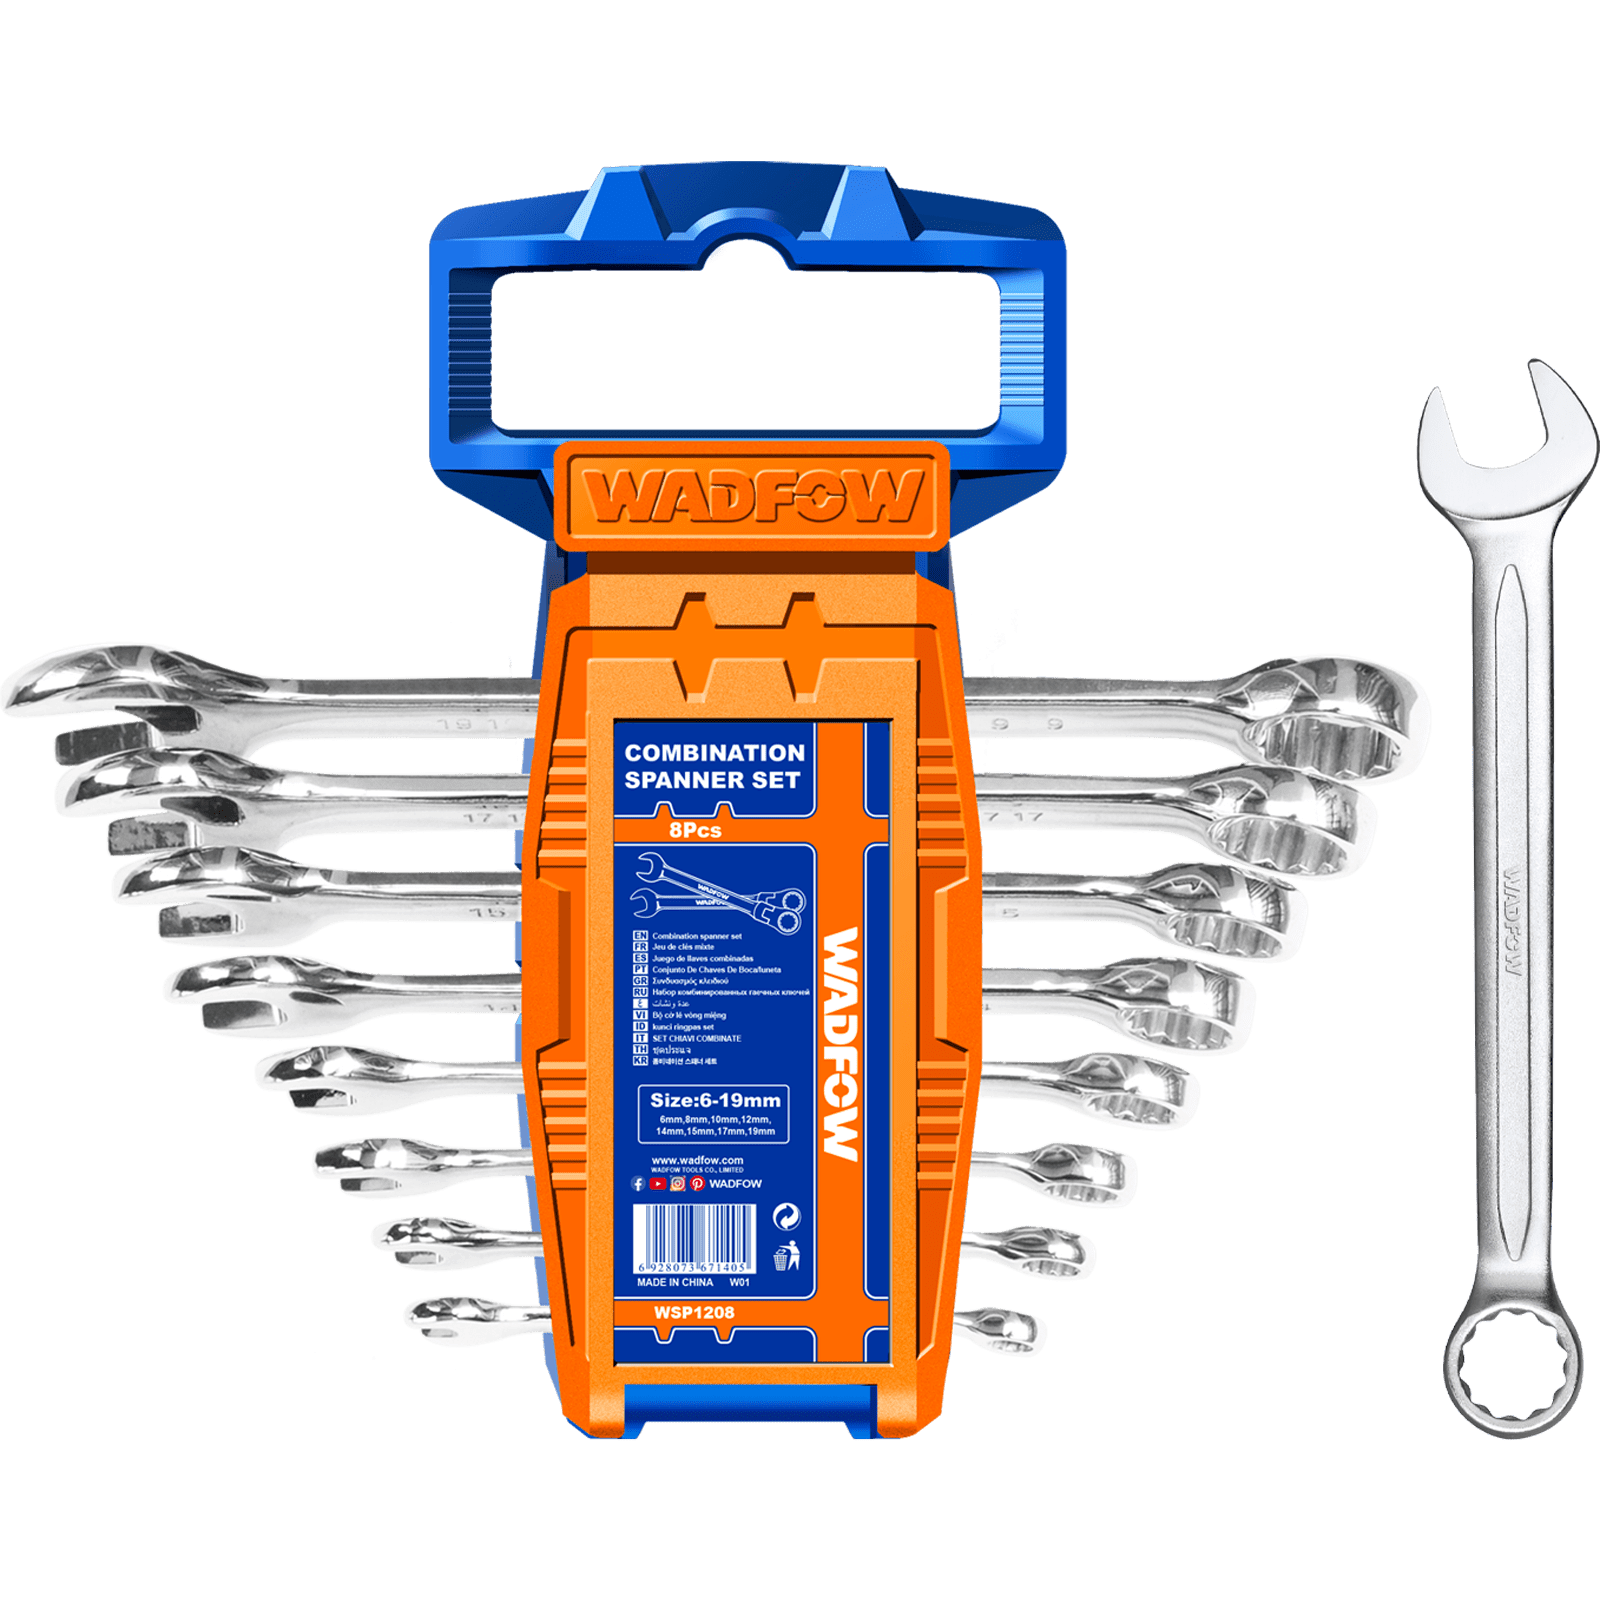 Total 8 Pieces Combination Spanner Set - THT102286 | Supply Master Accra, Ghana Wrenches Buy Tools hardware Building materials